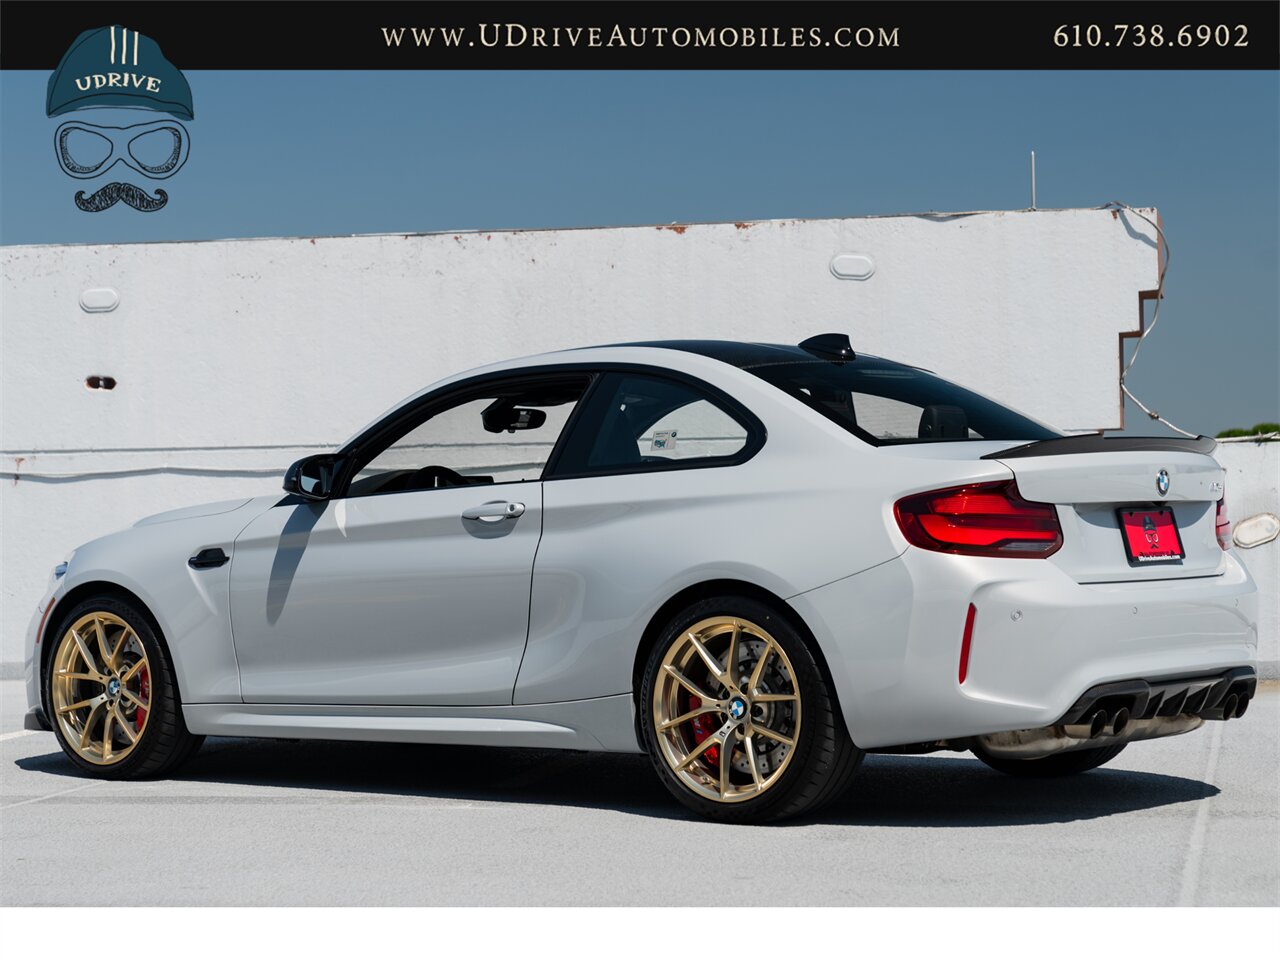 2020 BMW M2 CS  M2 CS 6 Speed Manual 2k Miles Full Body PPF Factory Warranty until 2025 - Photo 27 - West Chester, PA 19382